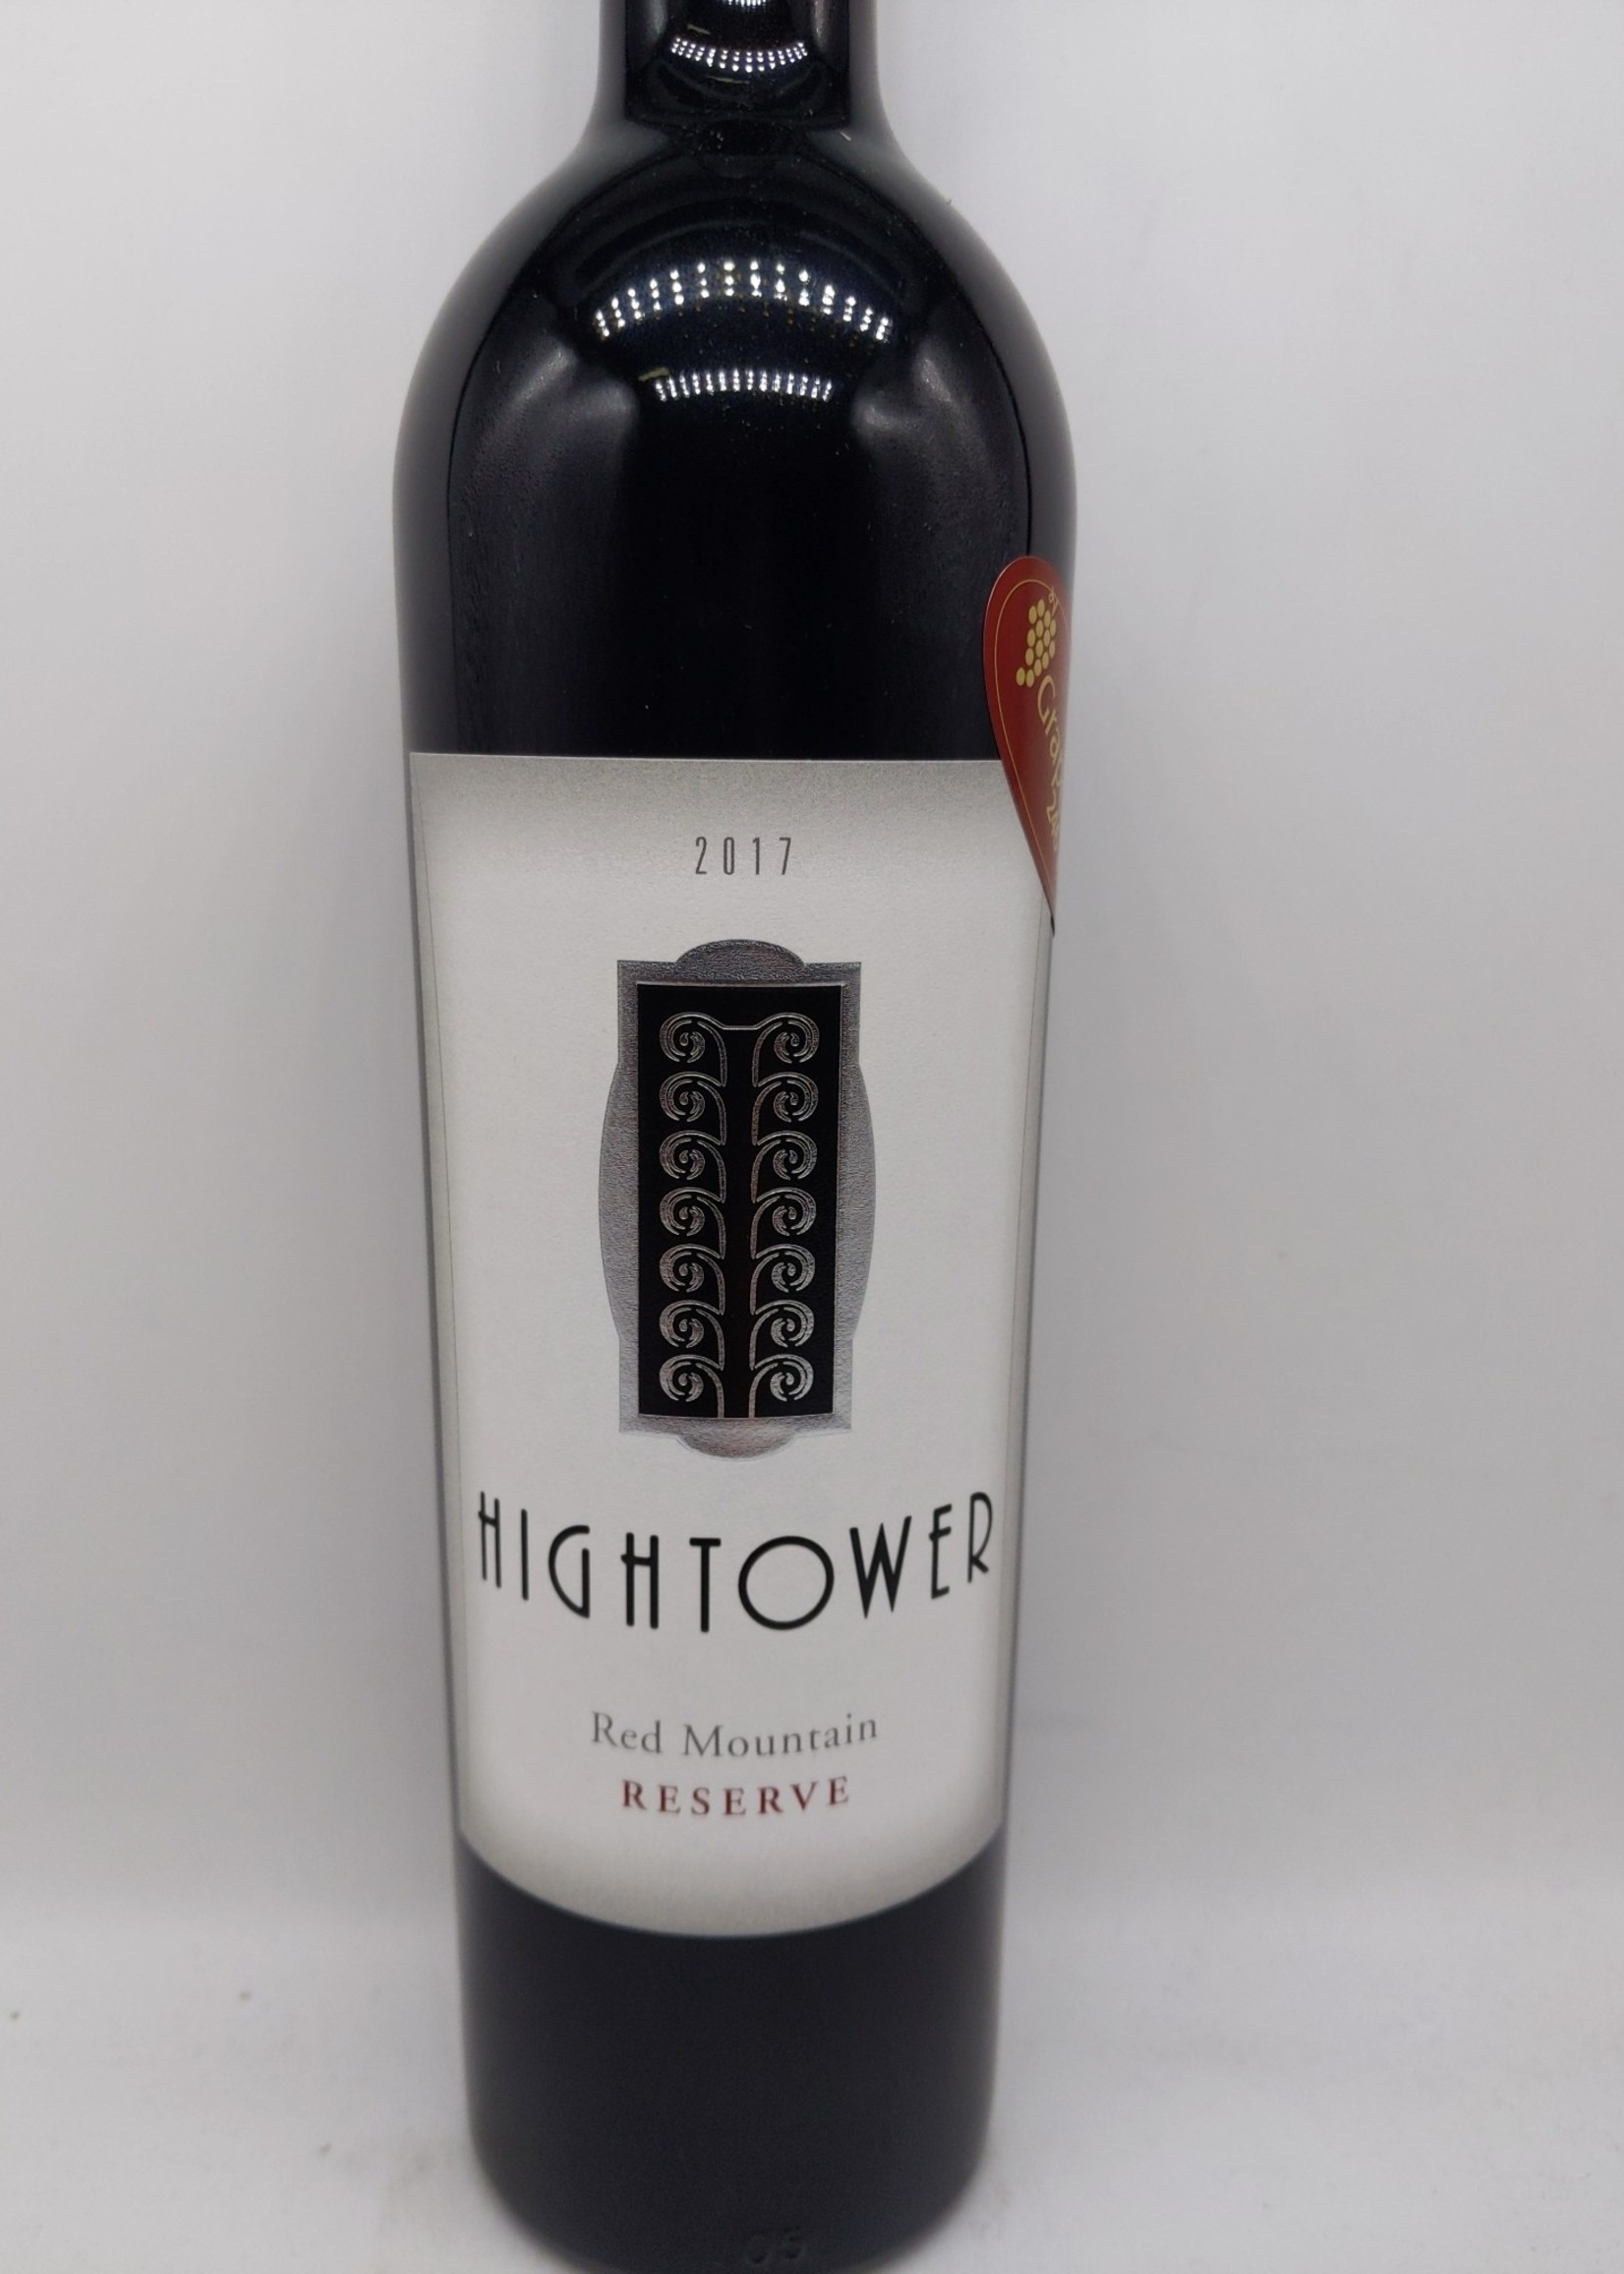 2017 HIGHTOWER RED MOUNTAIN RESERVE 750ml